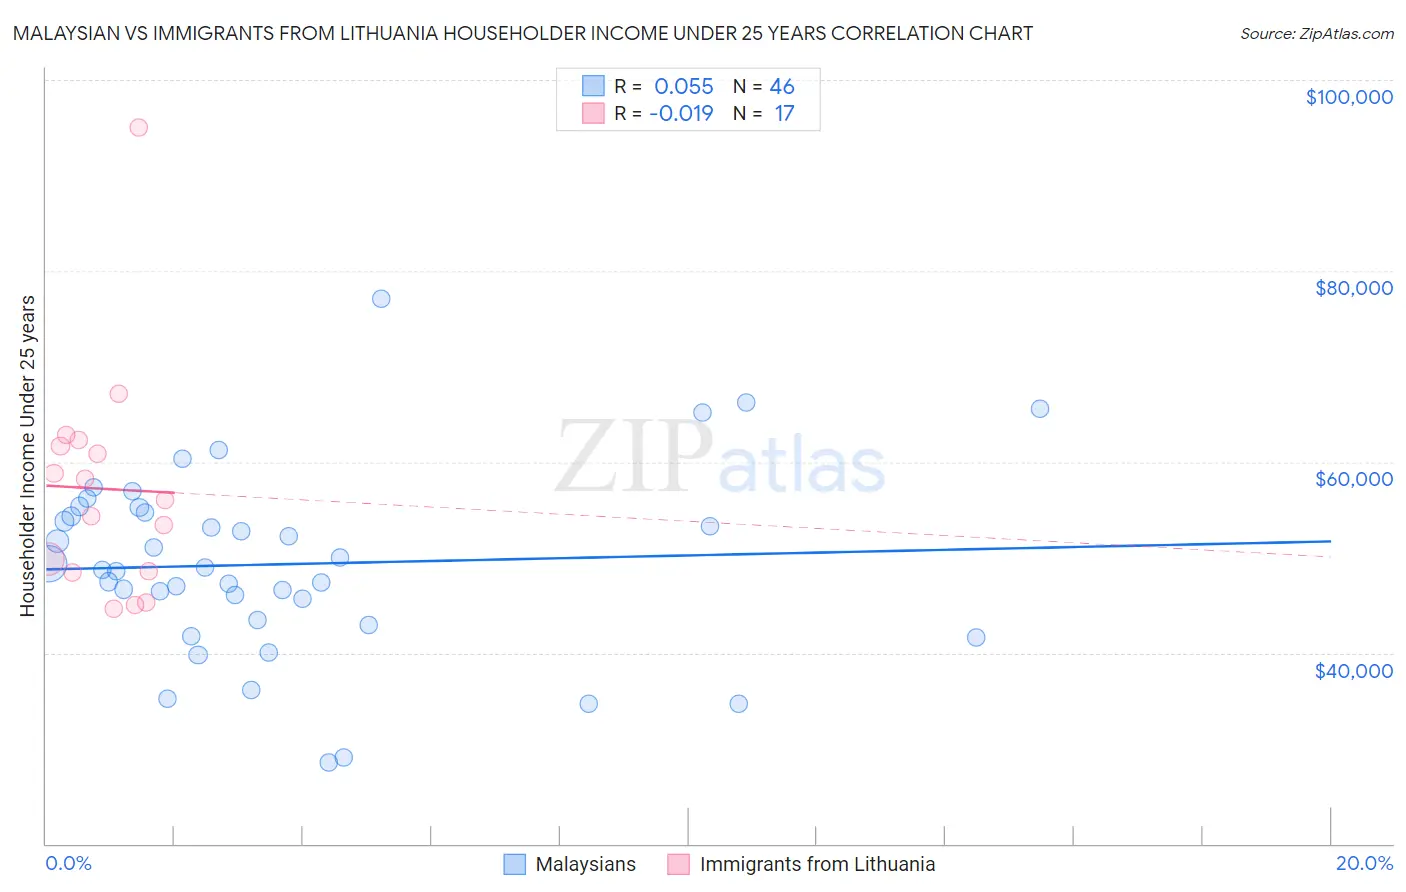 Malaysian vs Immigrants from Lithuania Householder Income Under 25 years